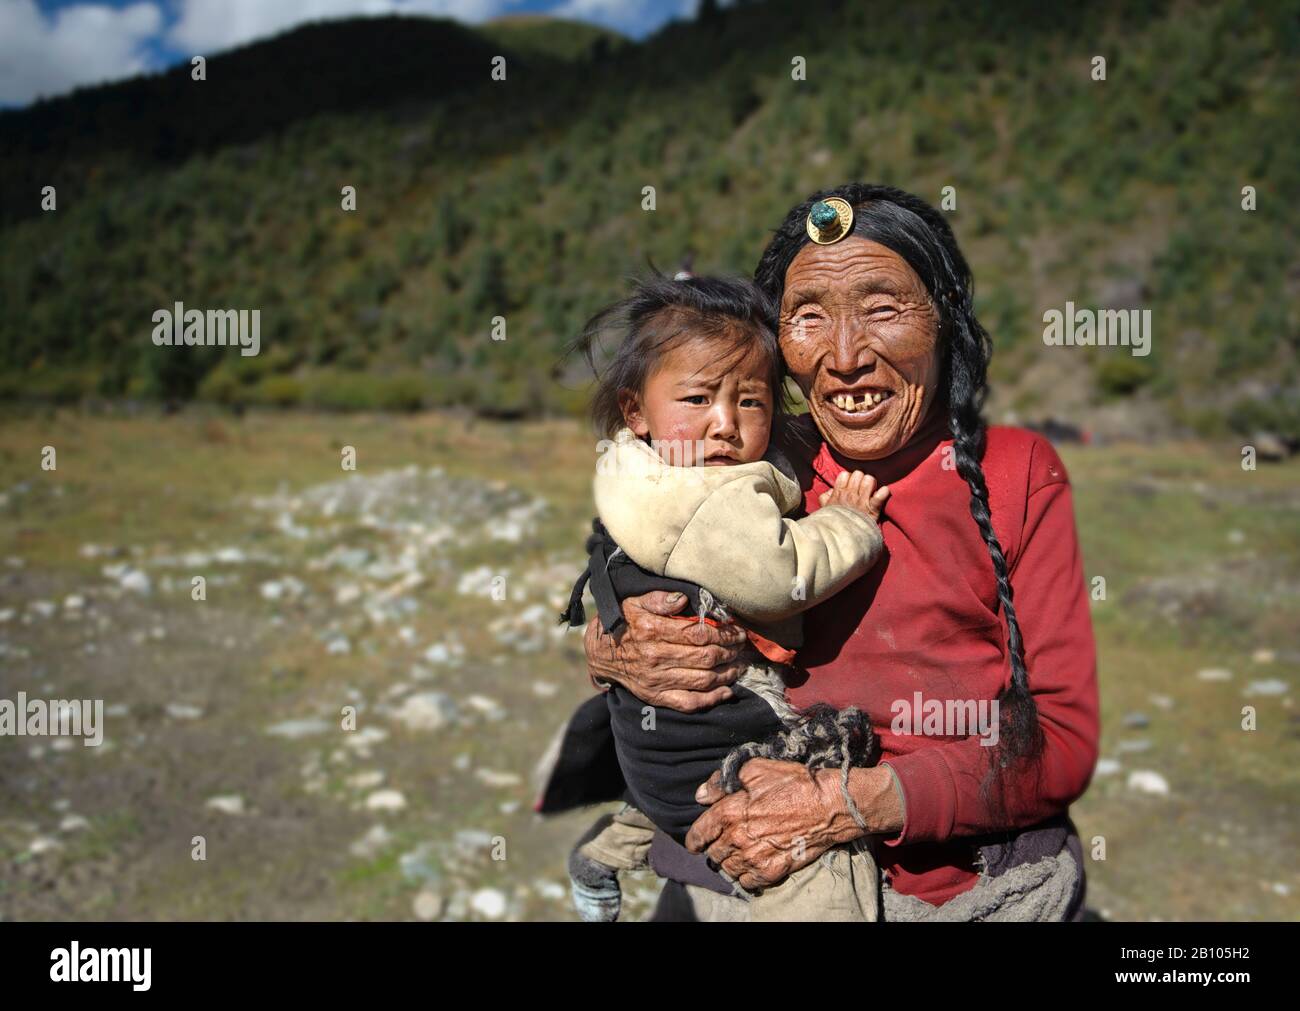 Tibetan families stick together. While parents work, grandparents are in charge of looking after their grandchildren. Remote Tibetan plateau Stock Photo